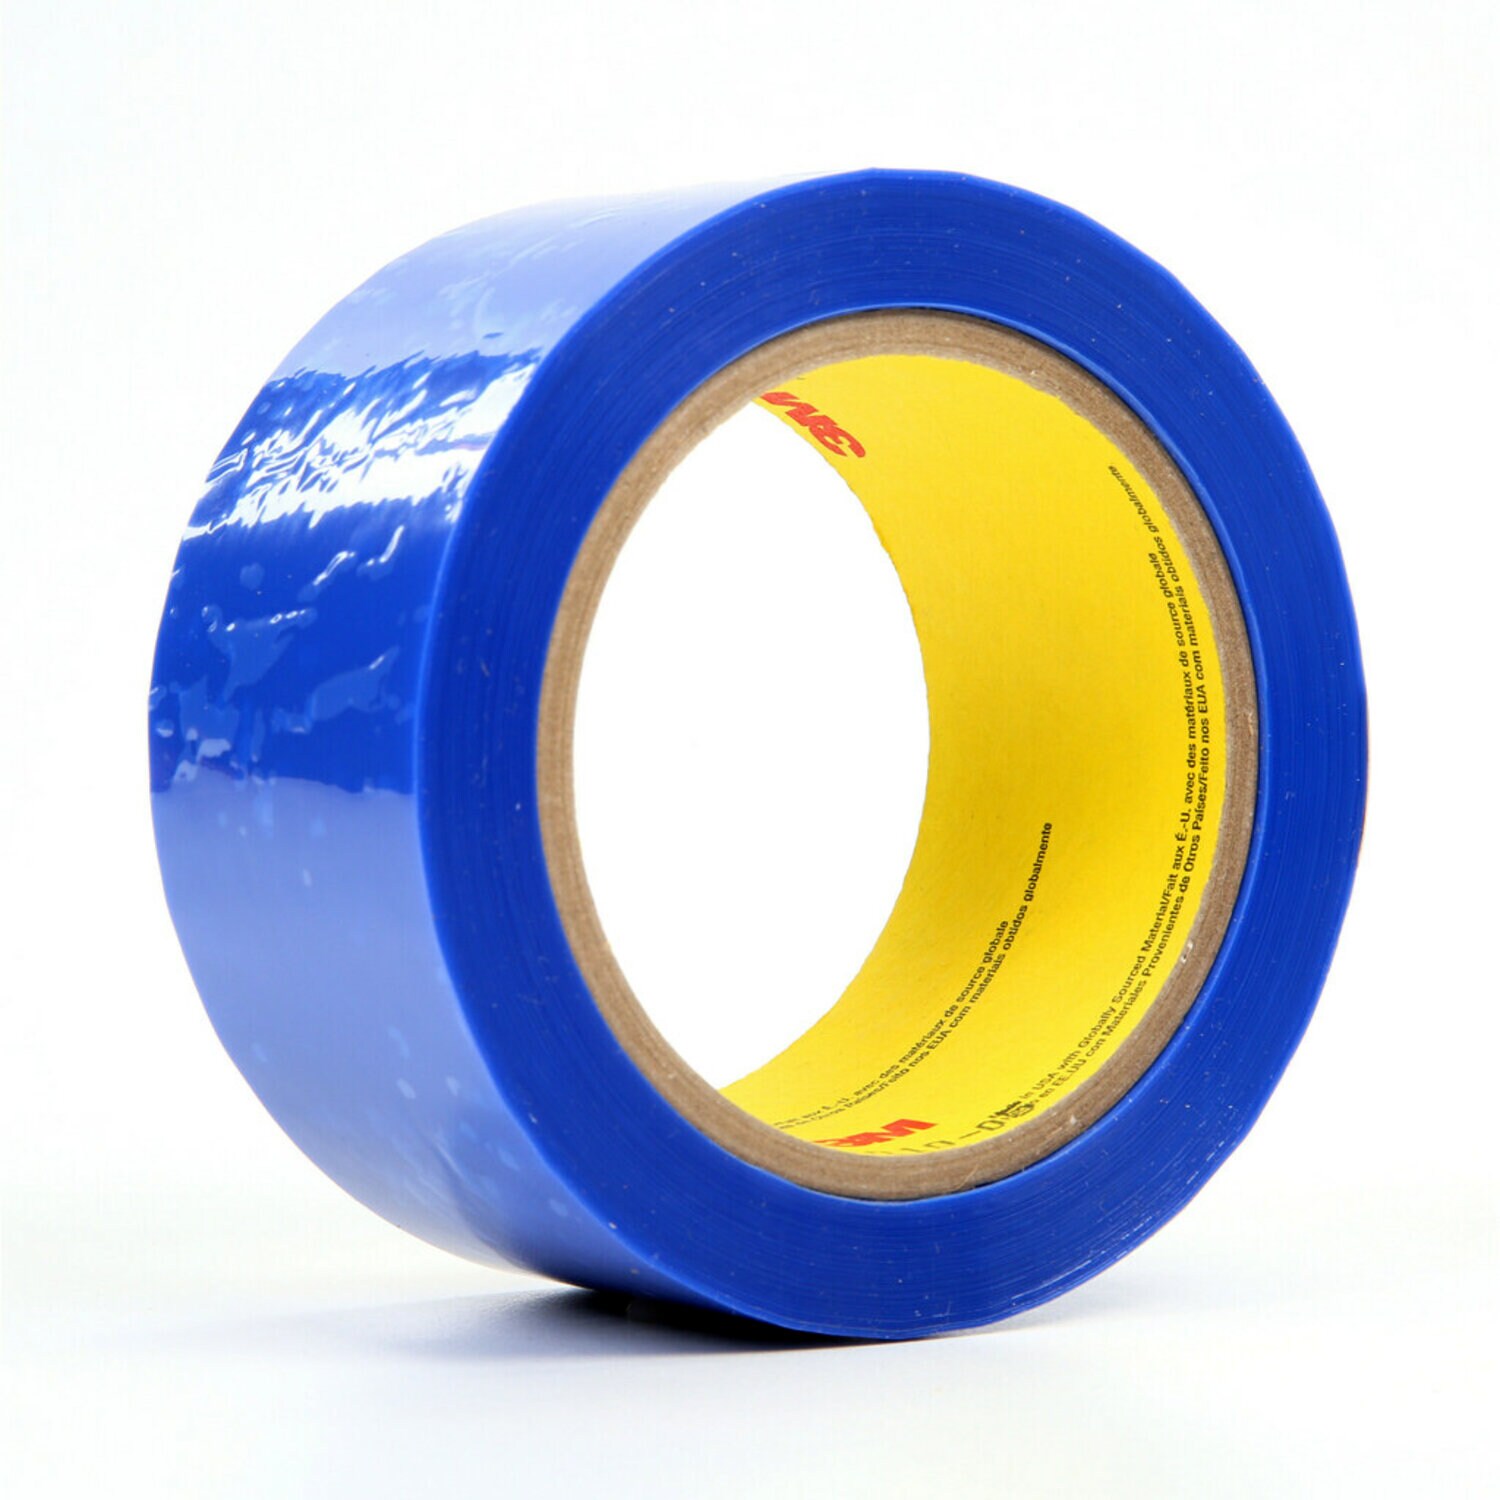 7000049599 - 3M Polyester Tape 8901, Blue, 2 in x 72 yd, 0.9 mil, 24 rolls per case